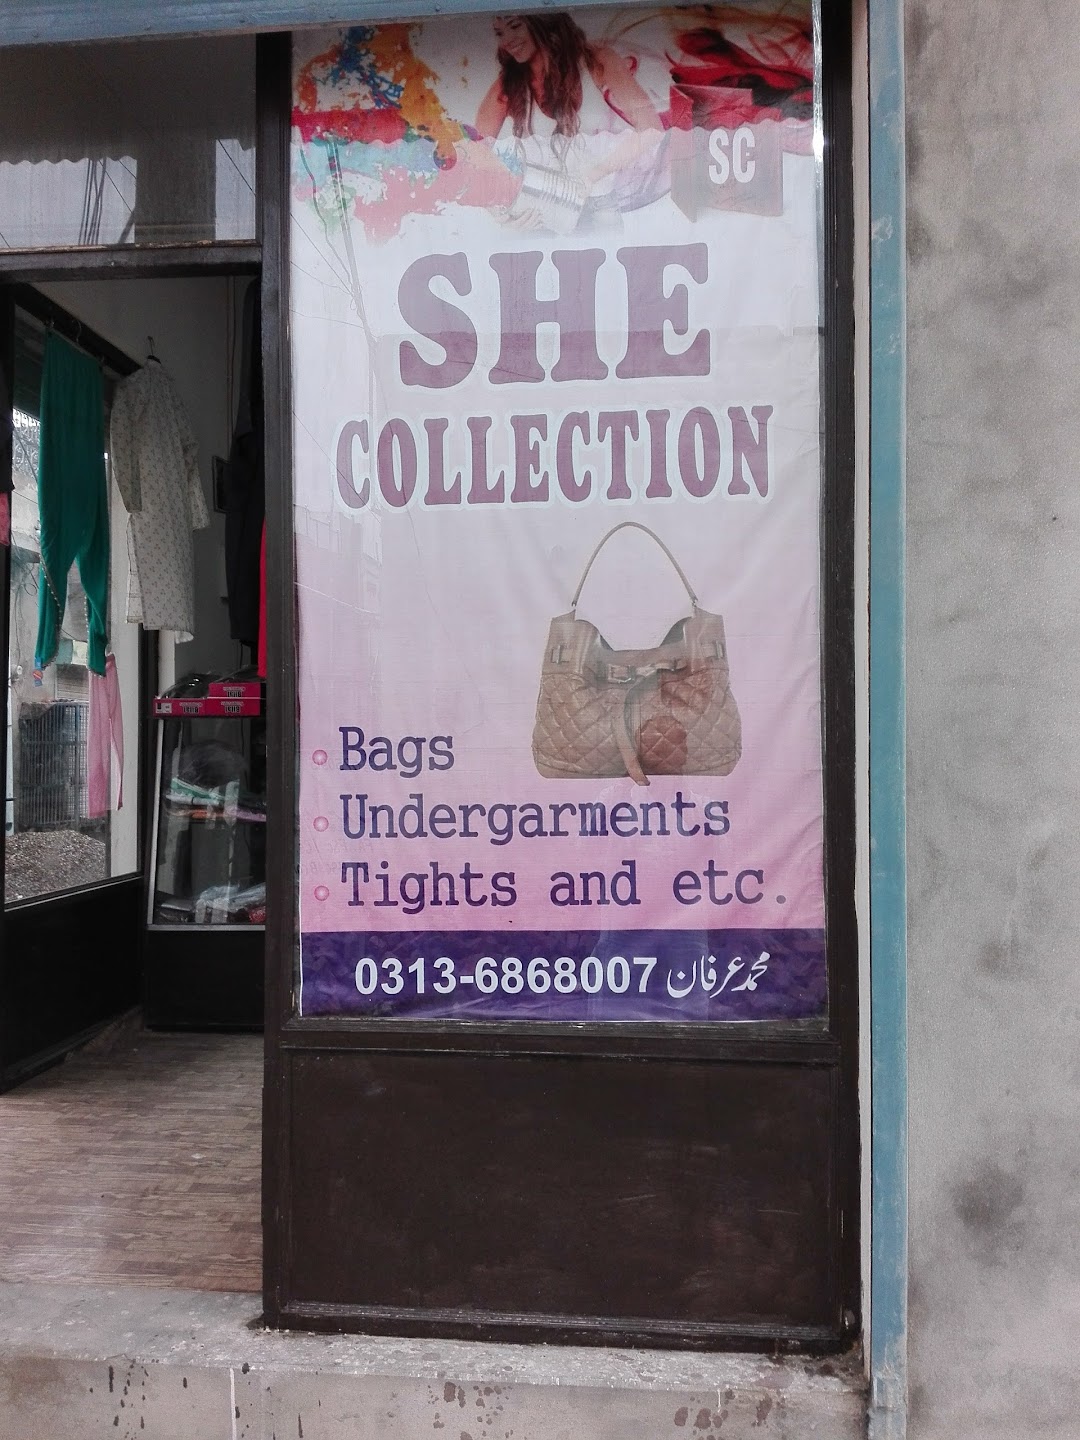 She Collection